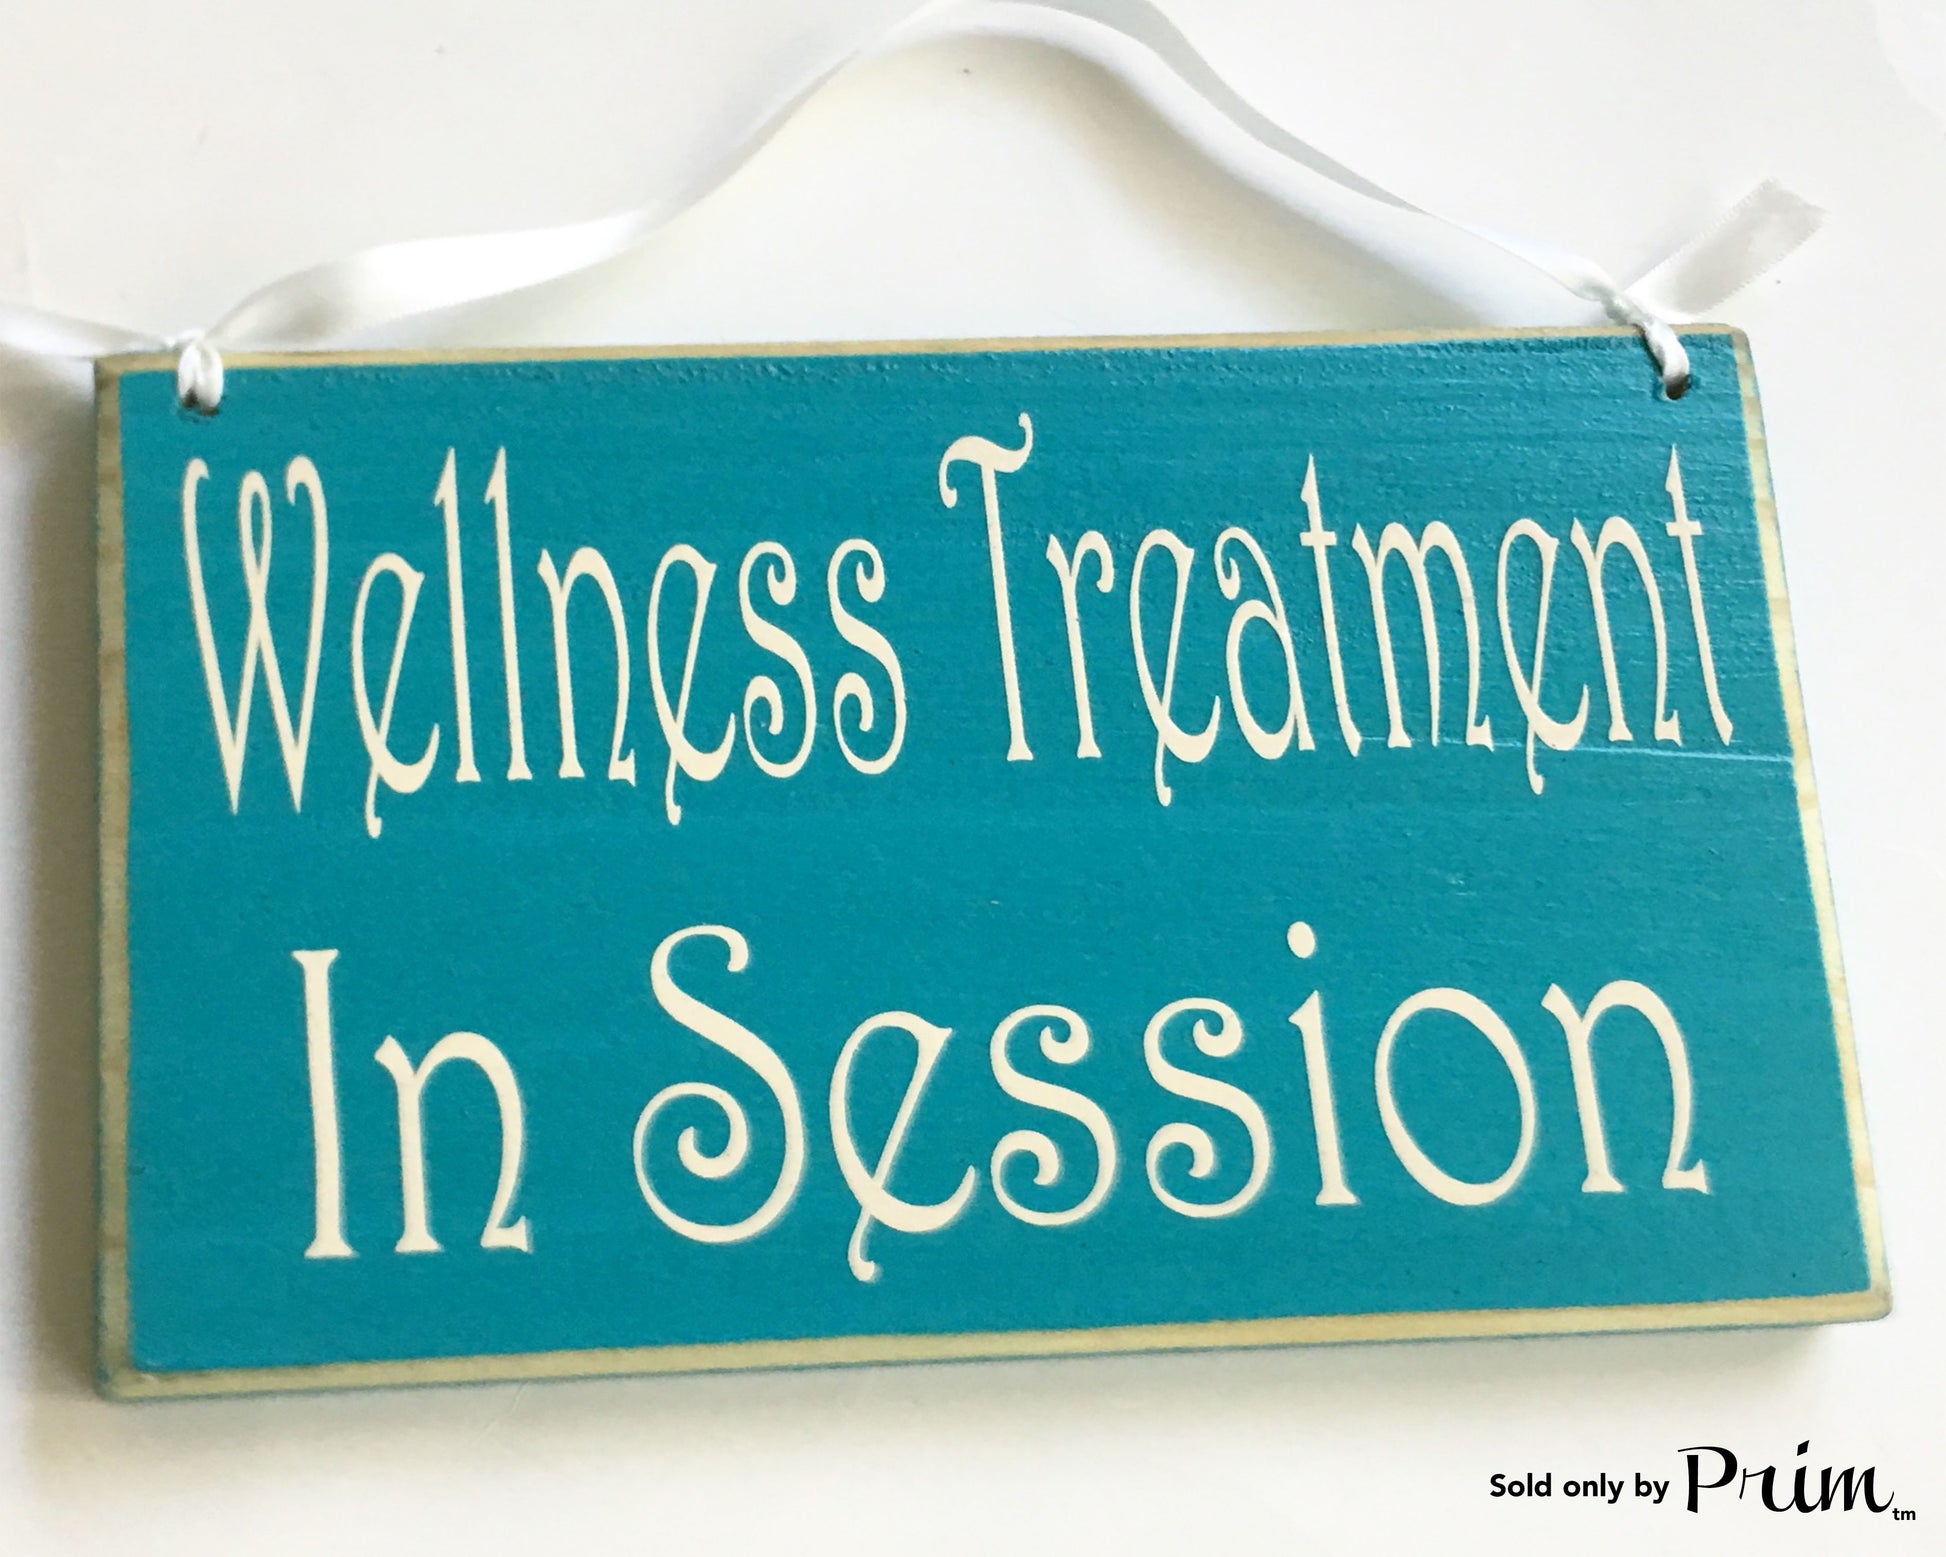 Wellness Treatment In Session Custom Wood Sign Do Not Disturb Spa Massage Office Open Closed Treatment Salon Massage Spa Office Welcome Door